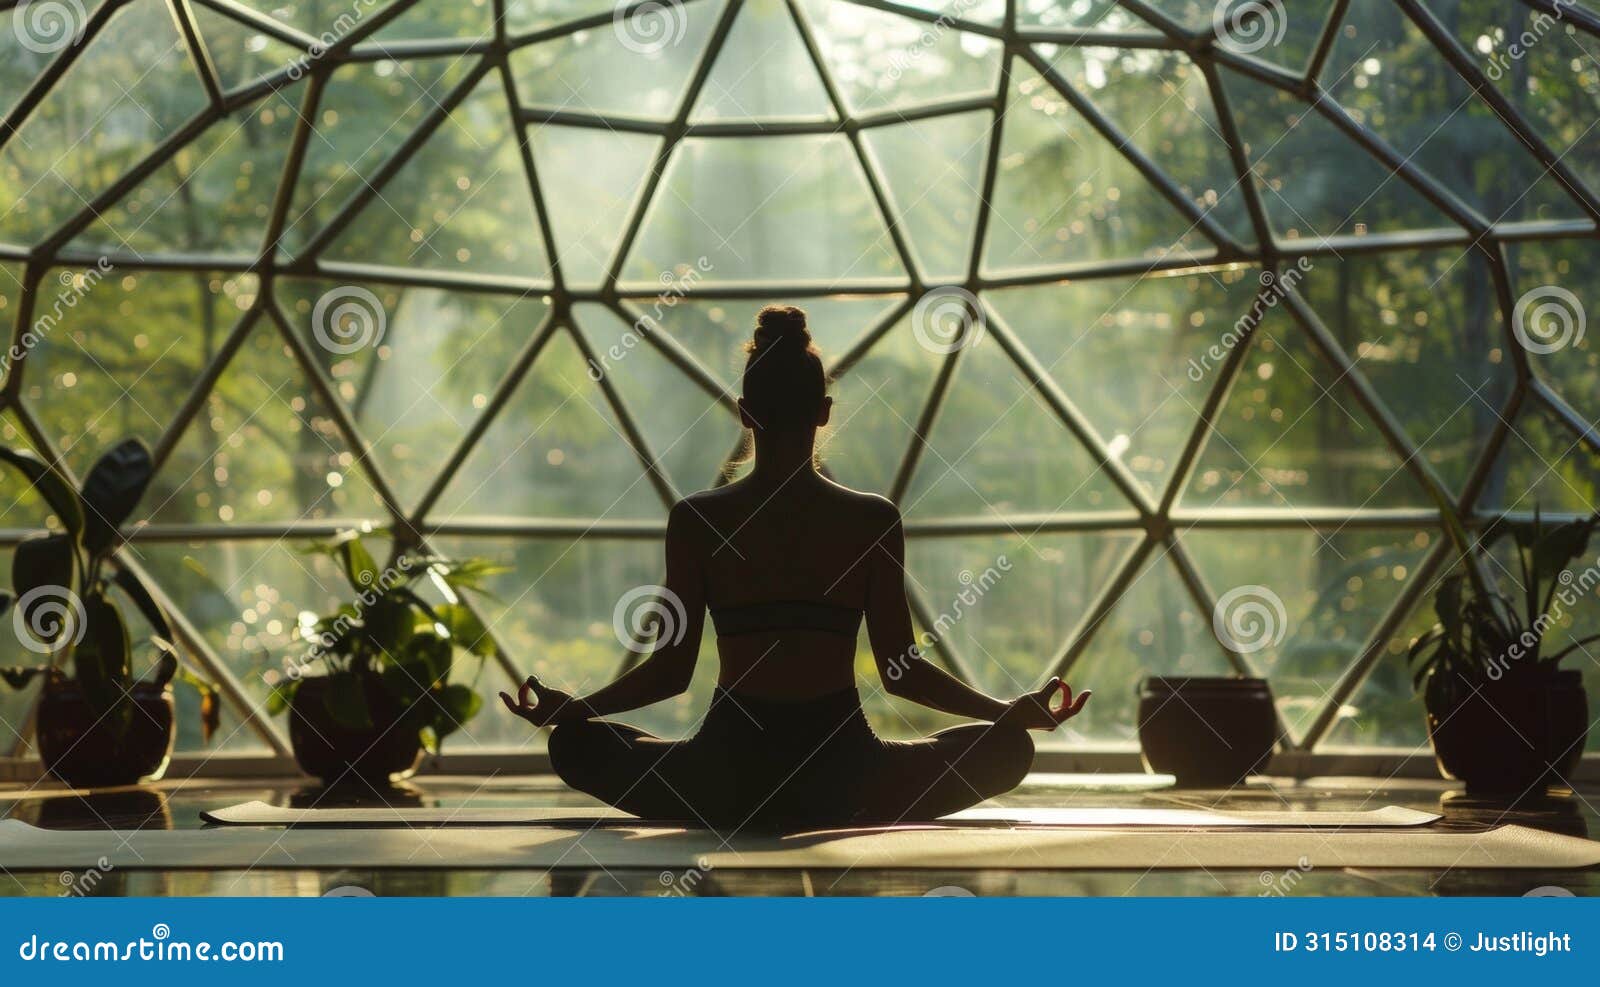 the peacefulness of nature and the gentle flow of morning yoga captured within the geometric  of a dome. 2d flat